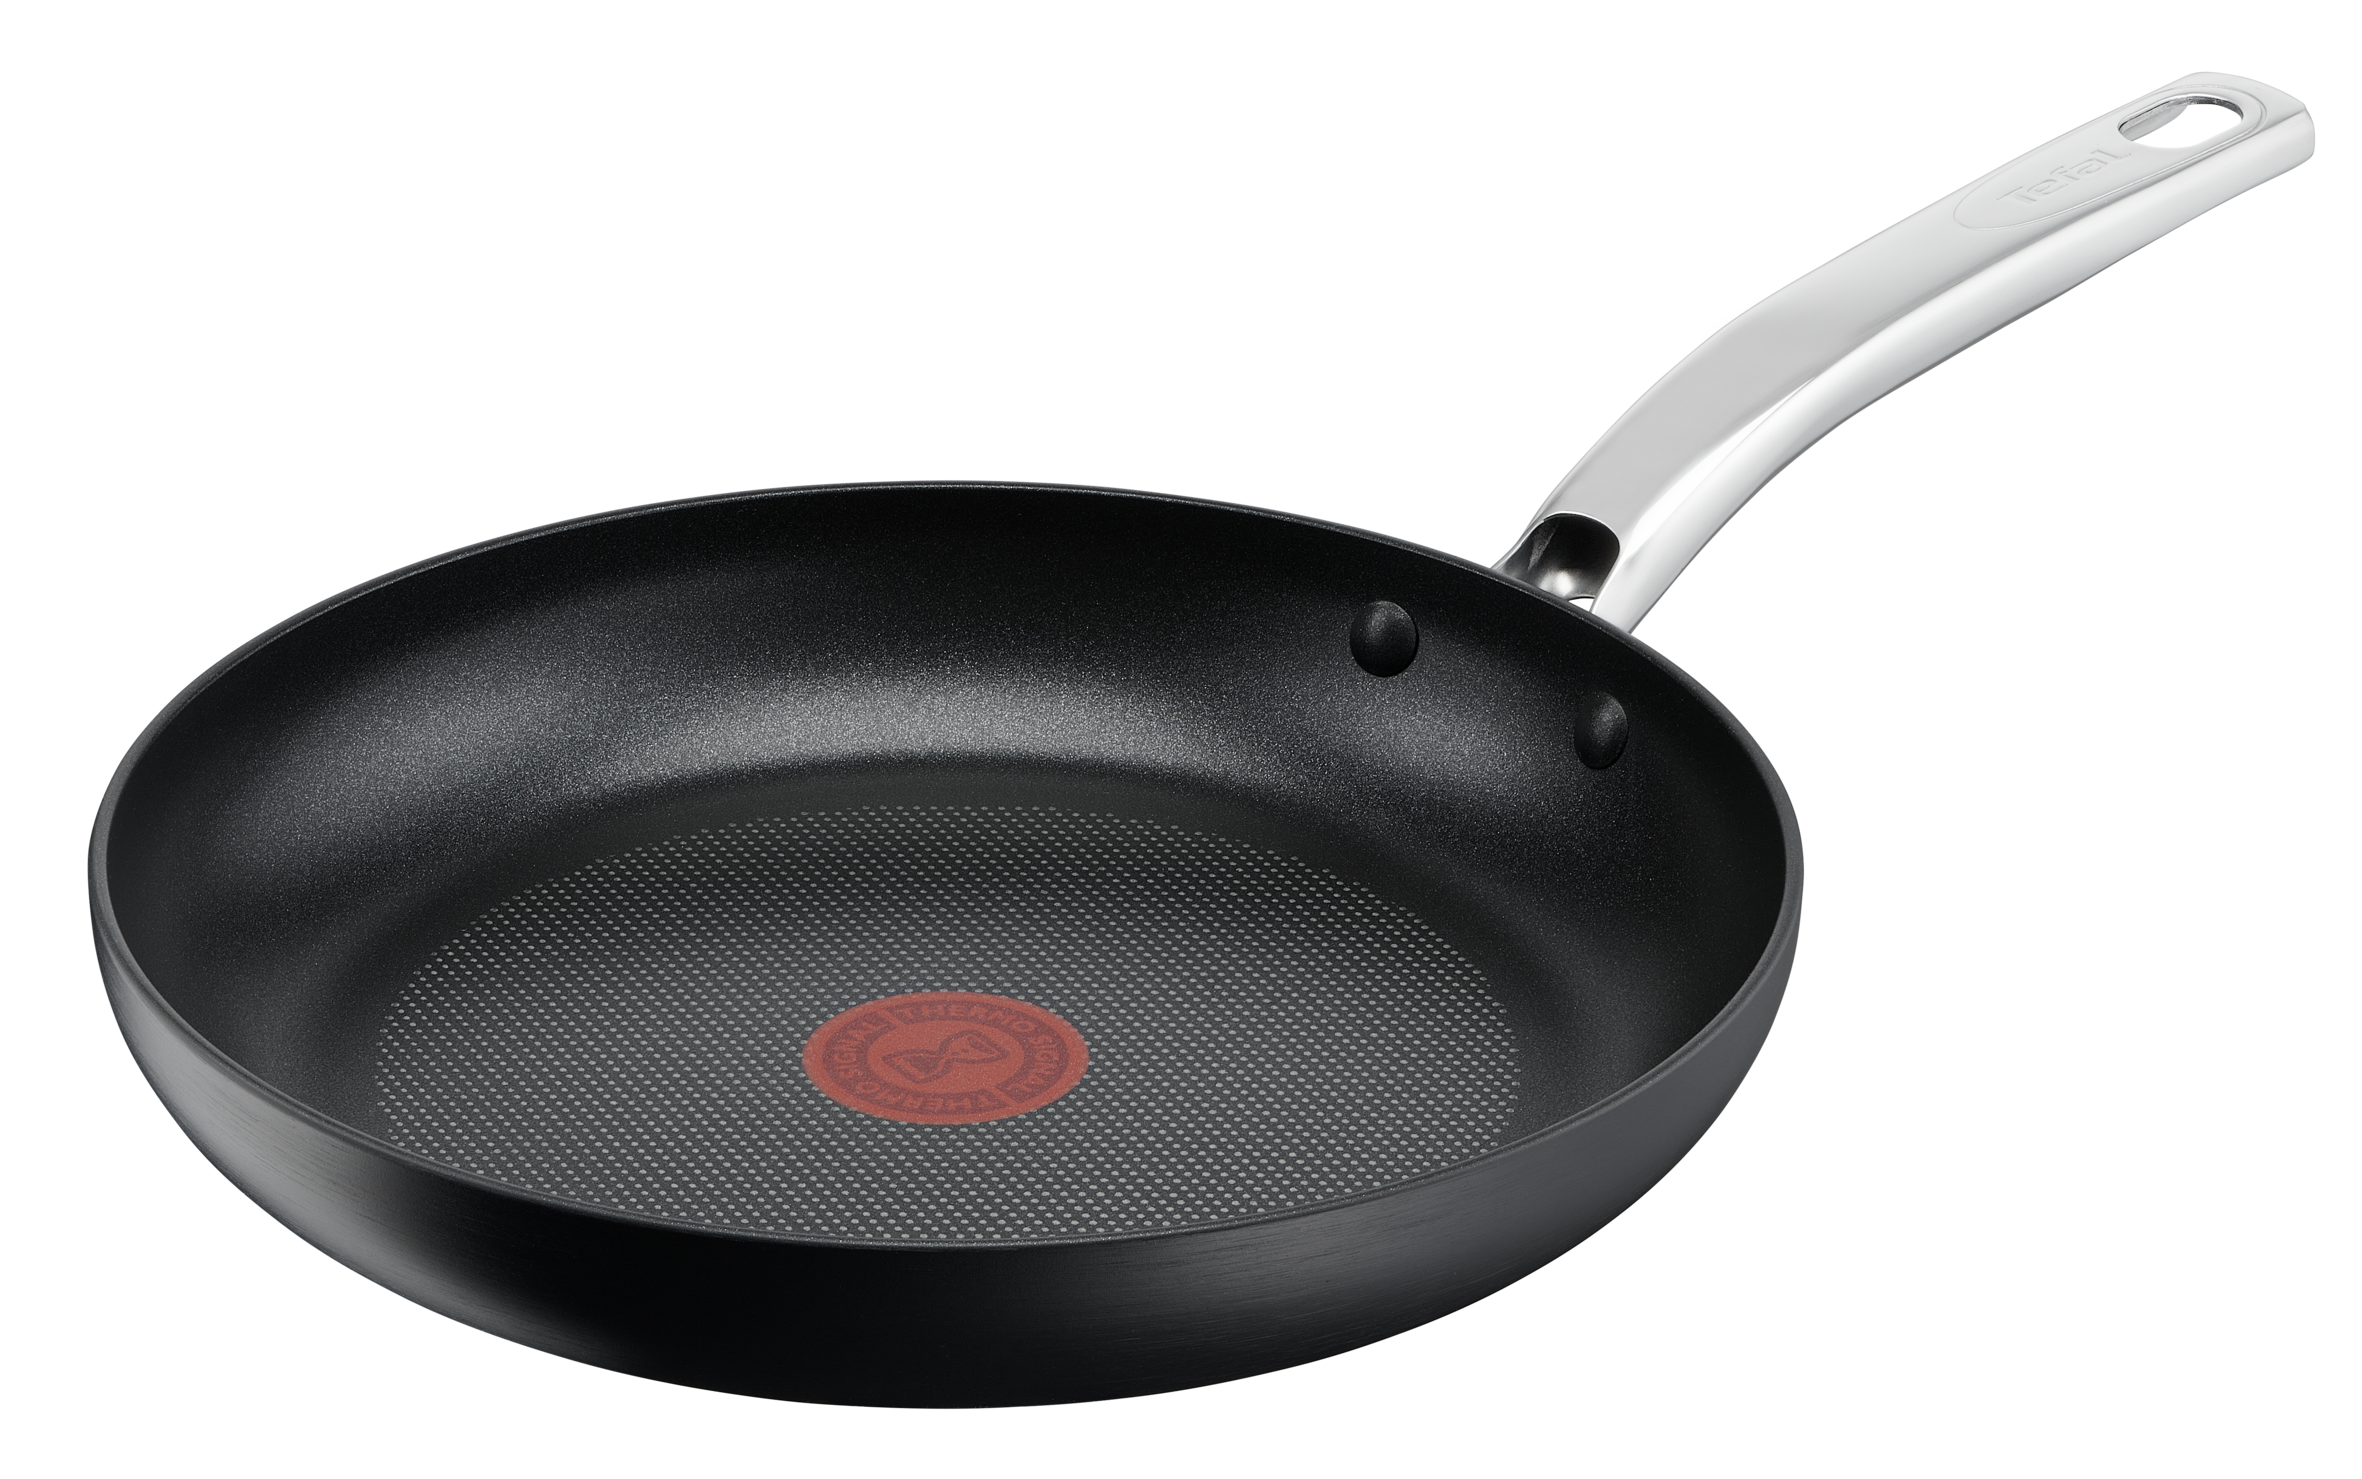 Tefal Gourmet Hard Anodised Non-Stick Frypan 26cm